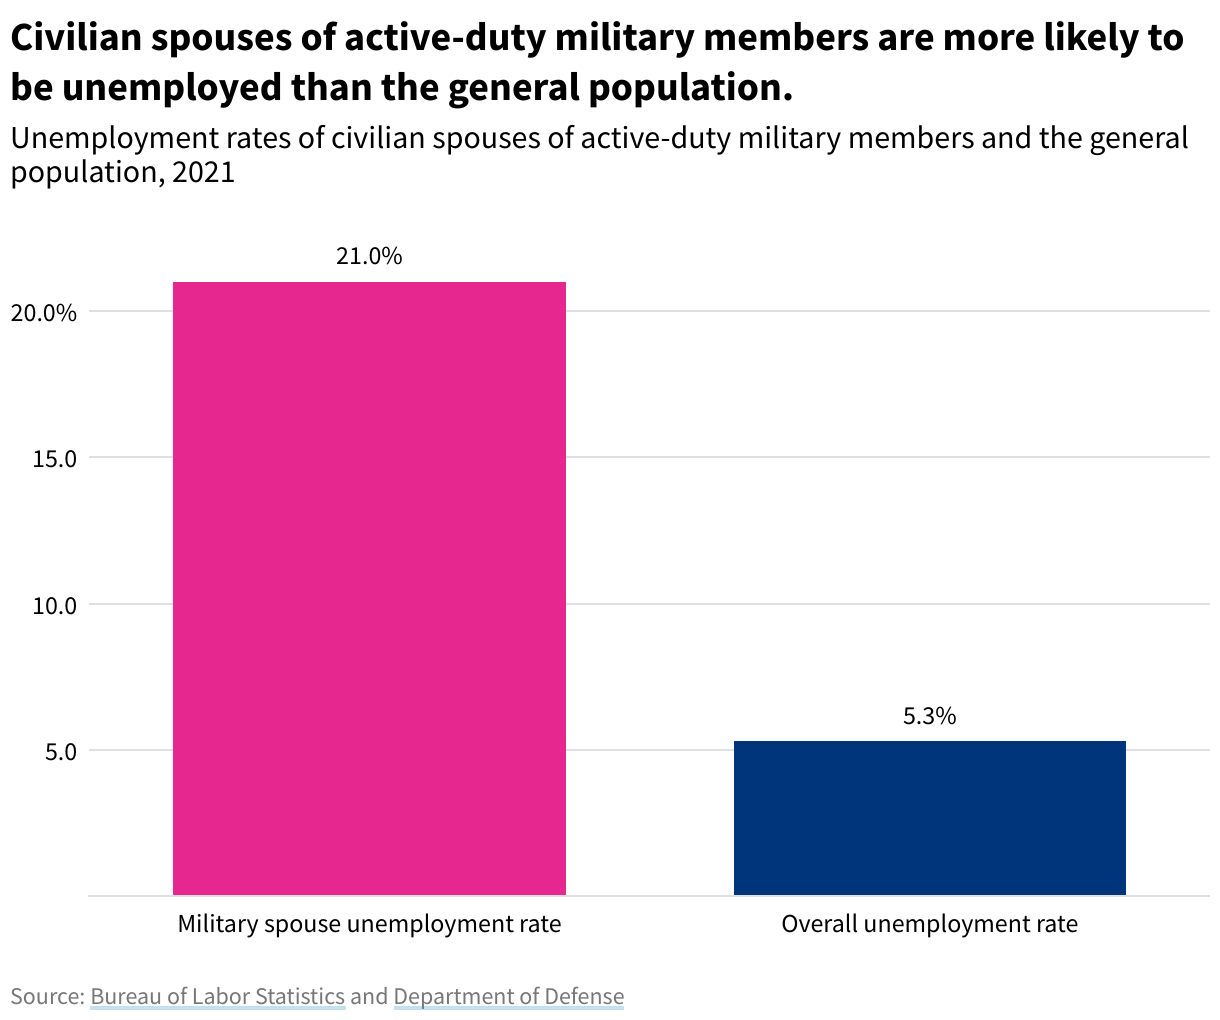 Bar chart showing the military spouse unemployment rate as 21% and overall unemployment as 6.3% in 2021.